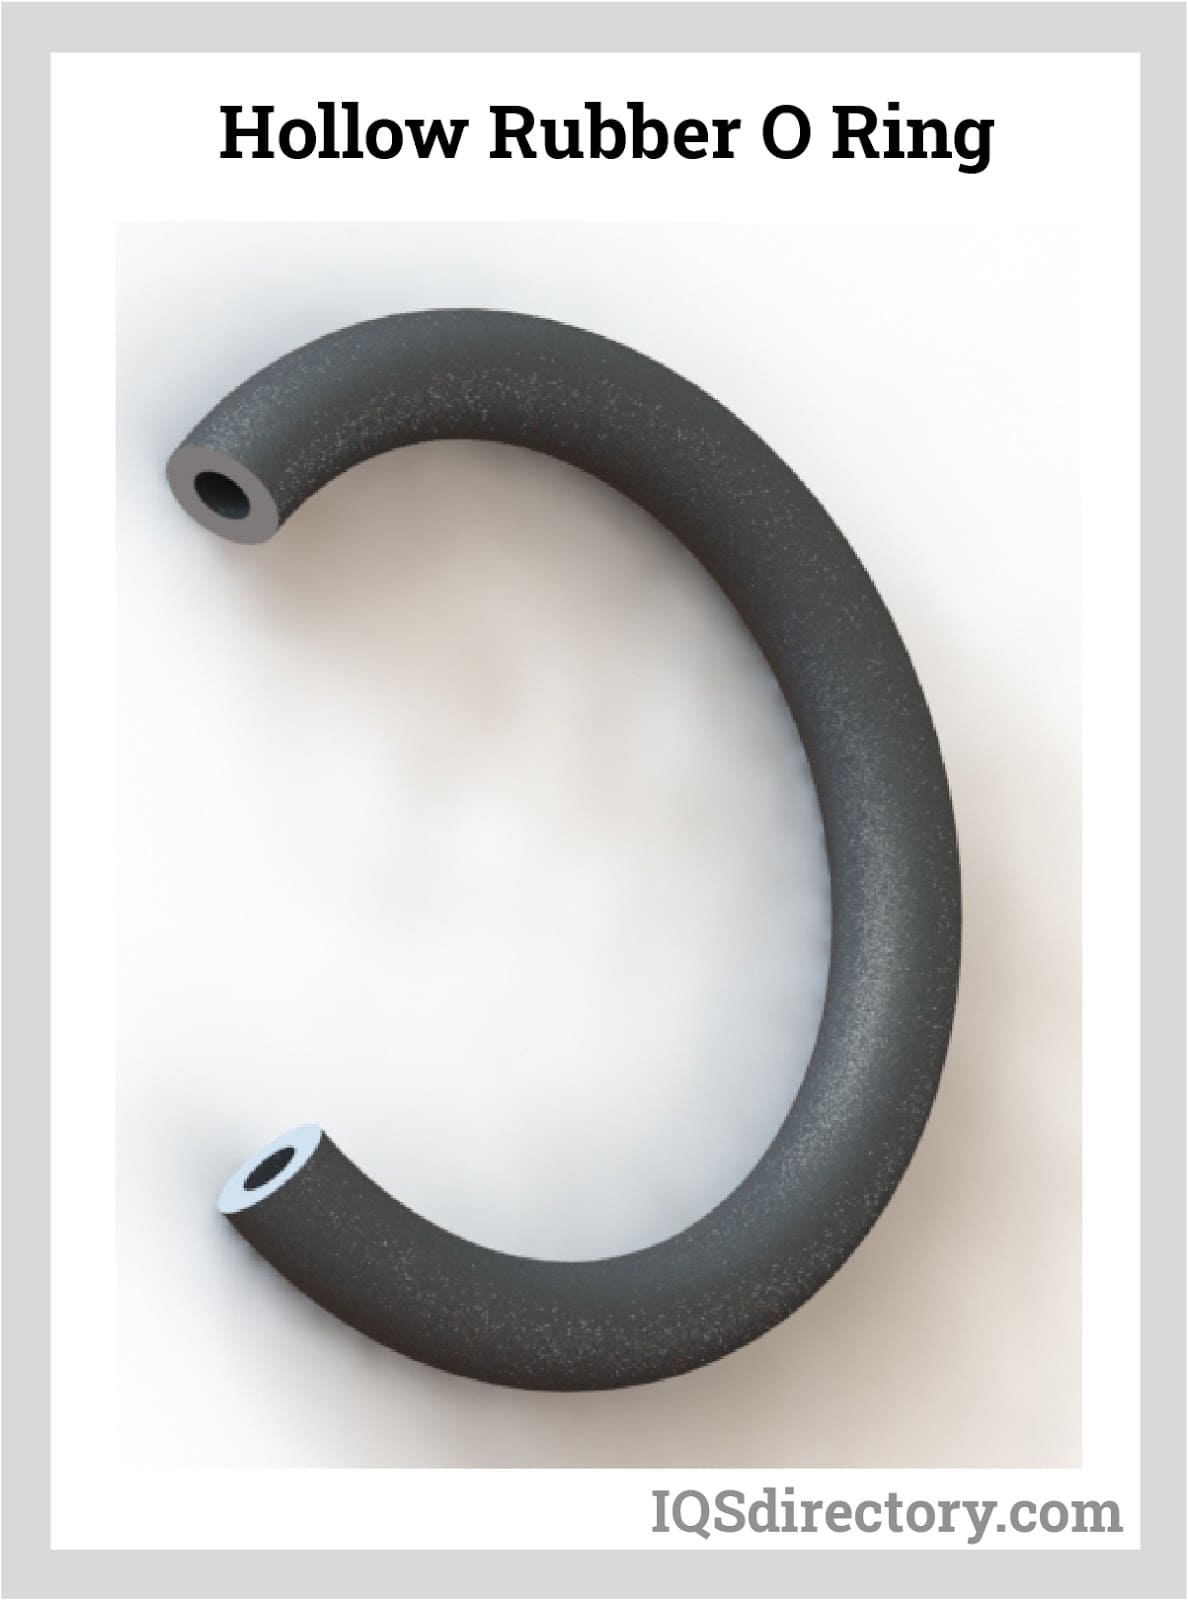 Hollow Rubber O Ring